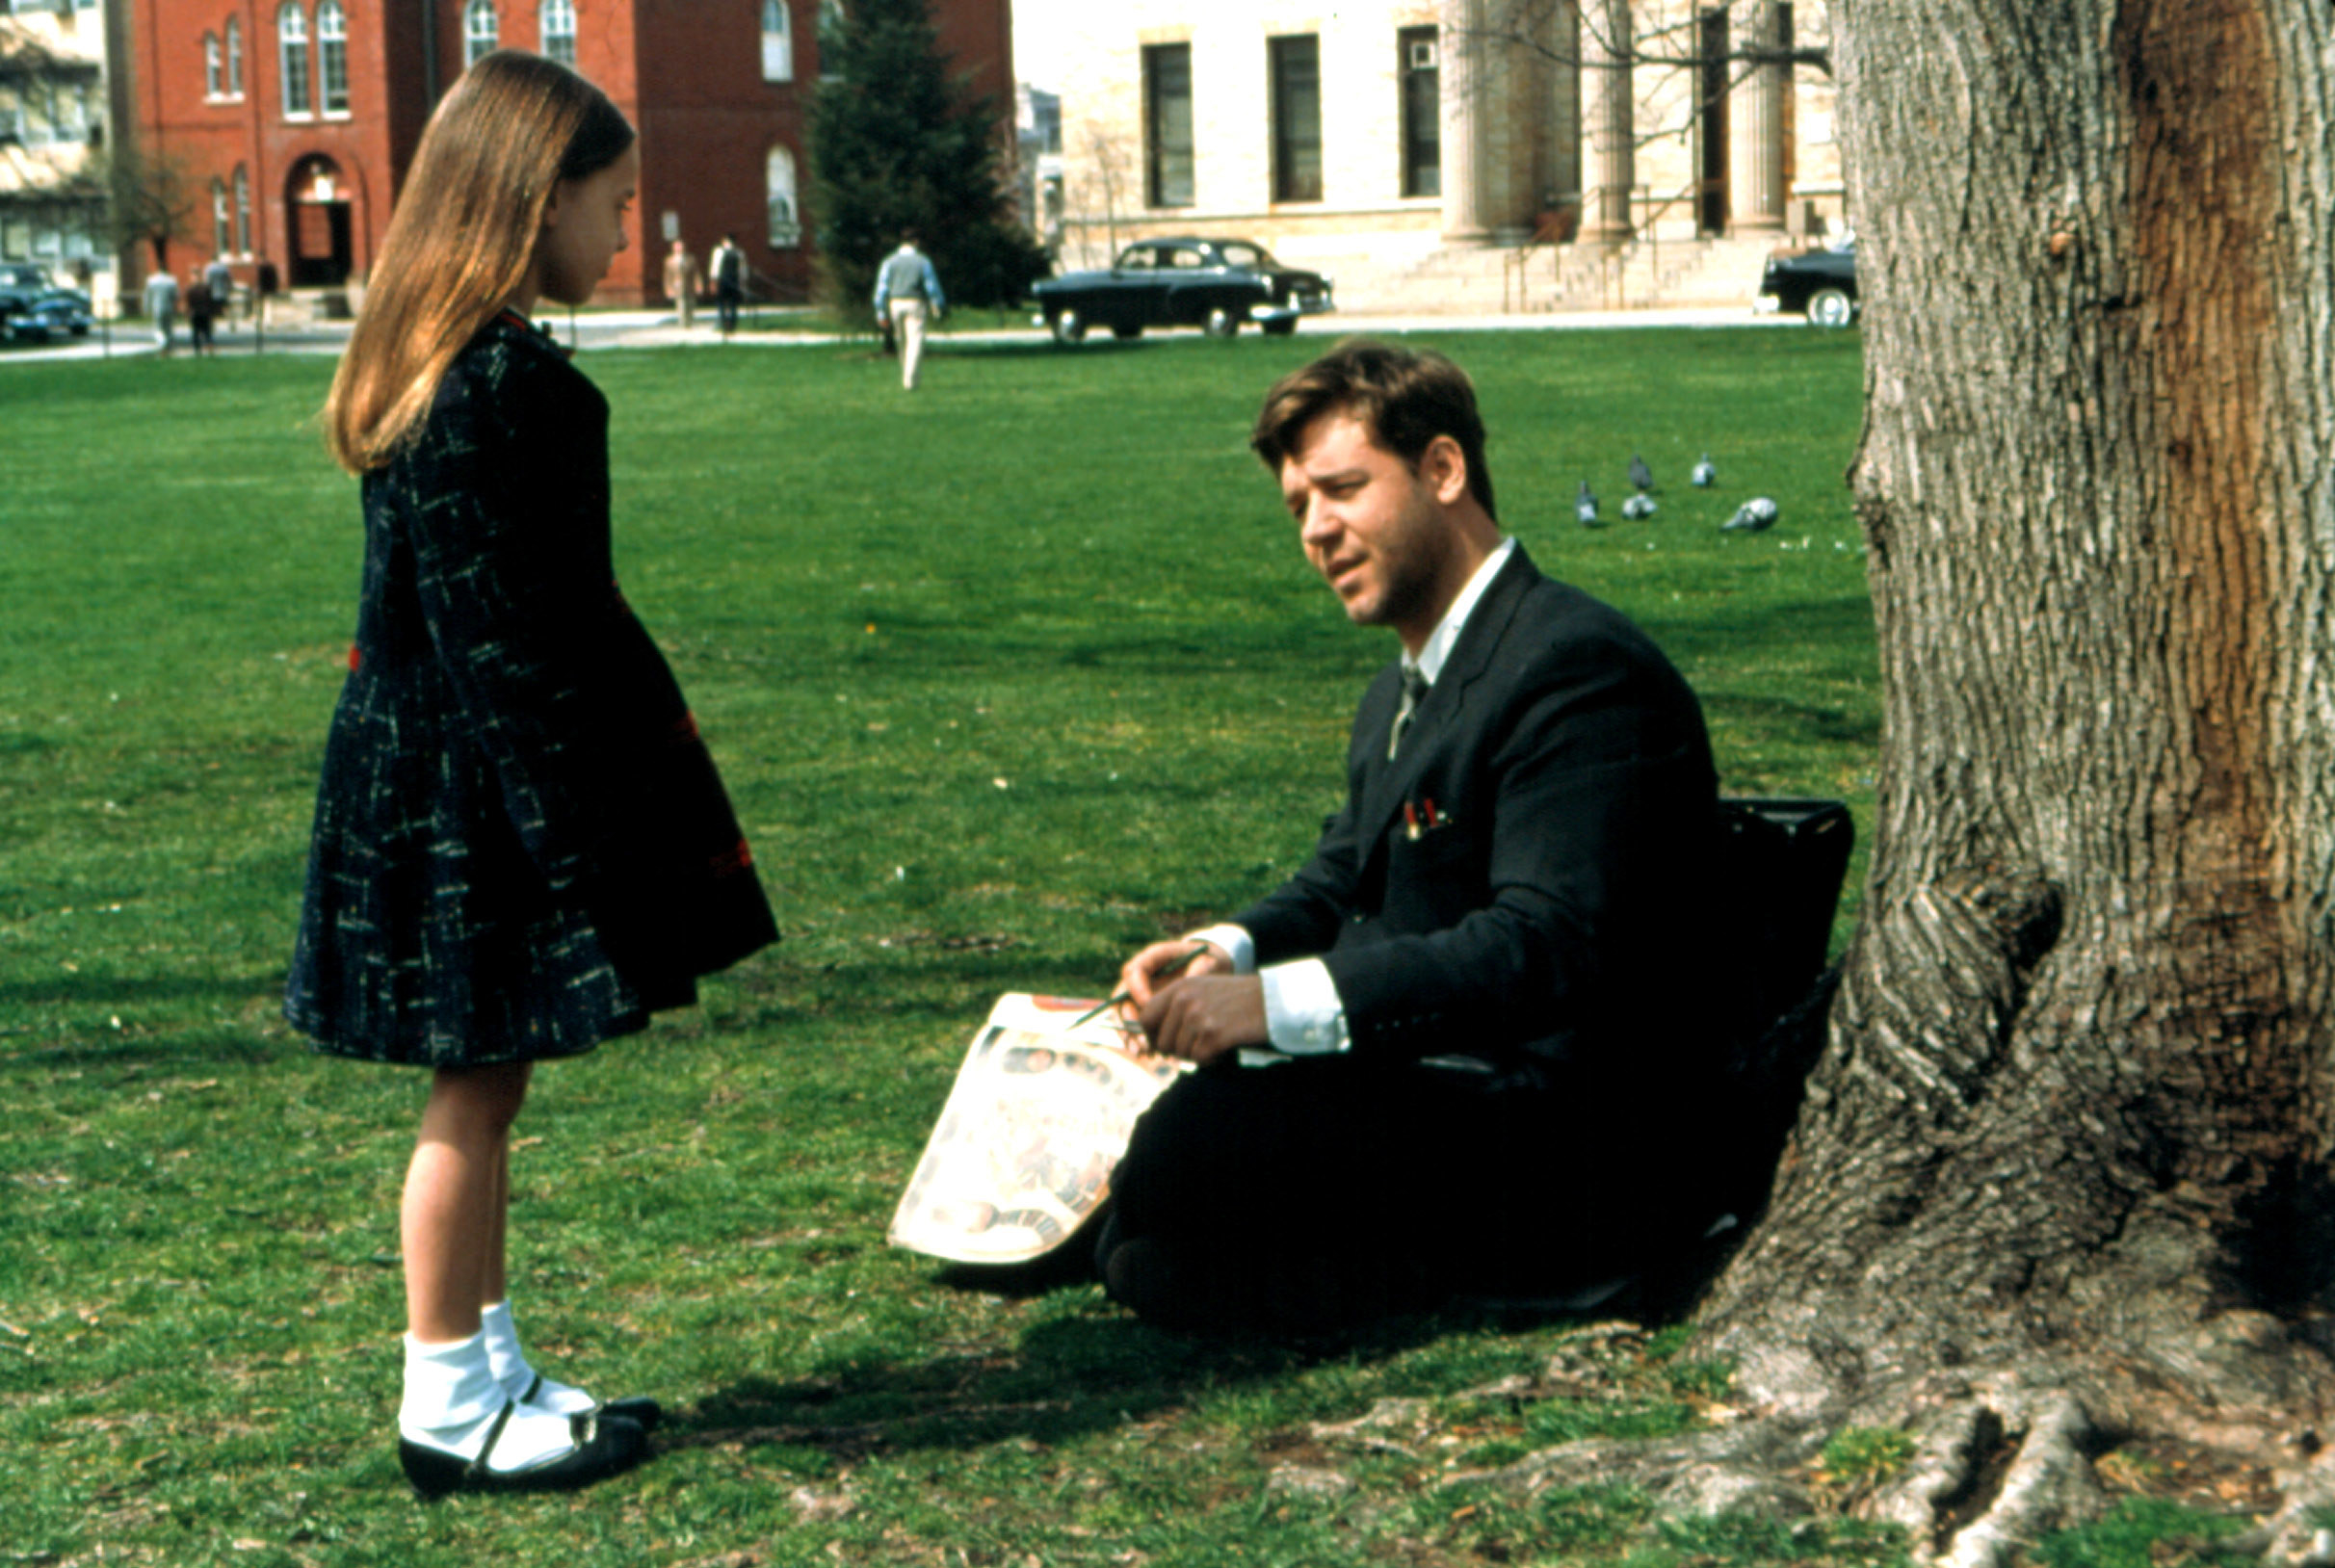 A little girl speaks to a man, who is sitting under a tree reading